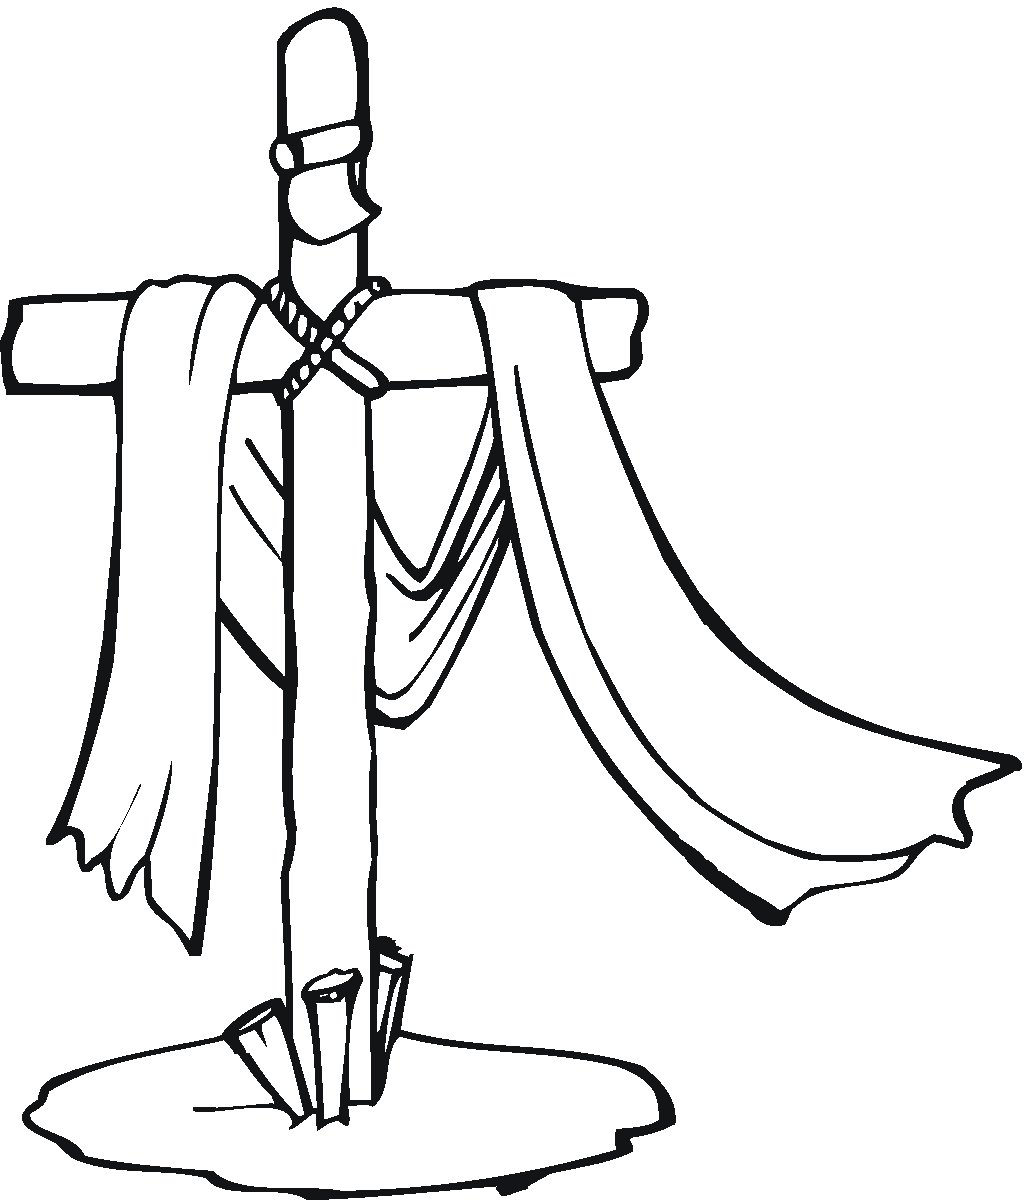 Cool Cross To Print Coloring Page